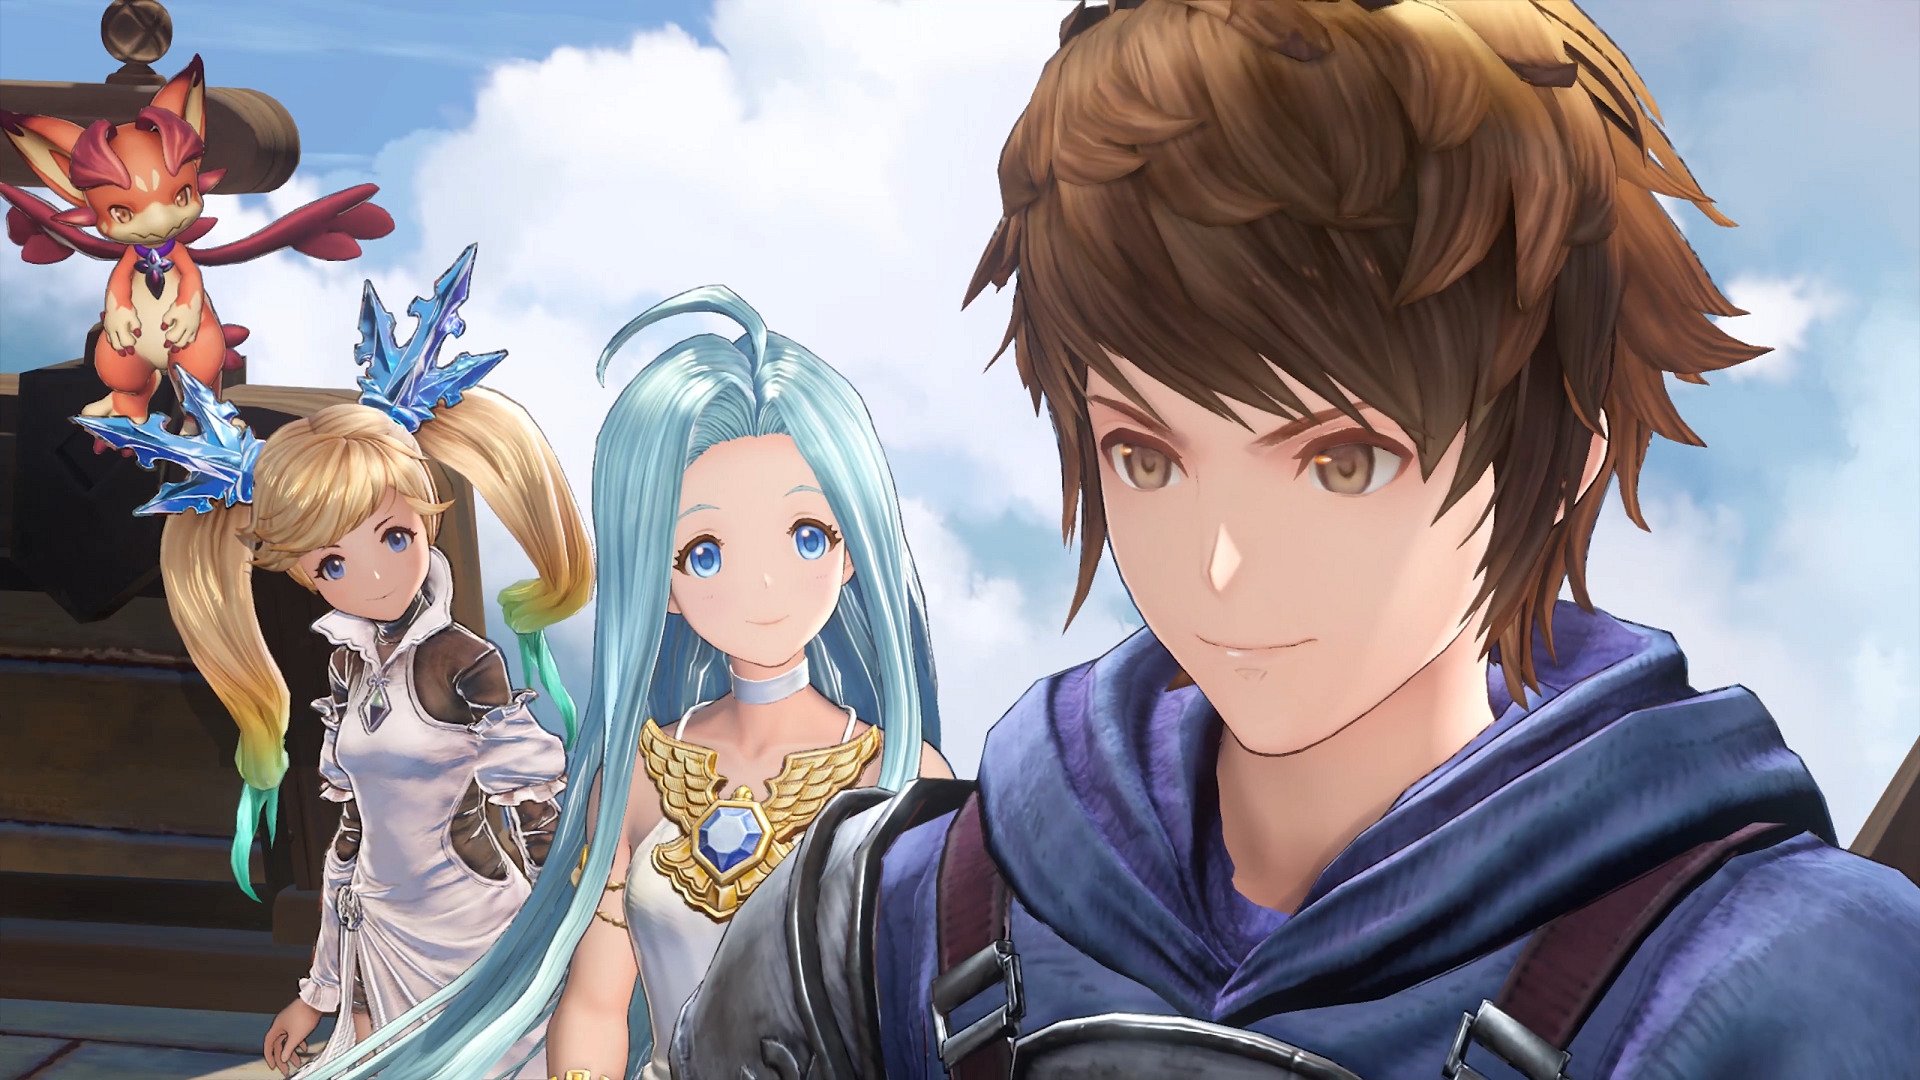 Granblue Fantasy Relink - Screenshots and Gameplay Newly Revealed